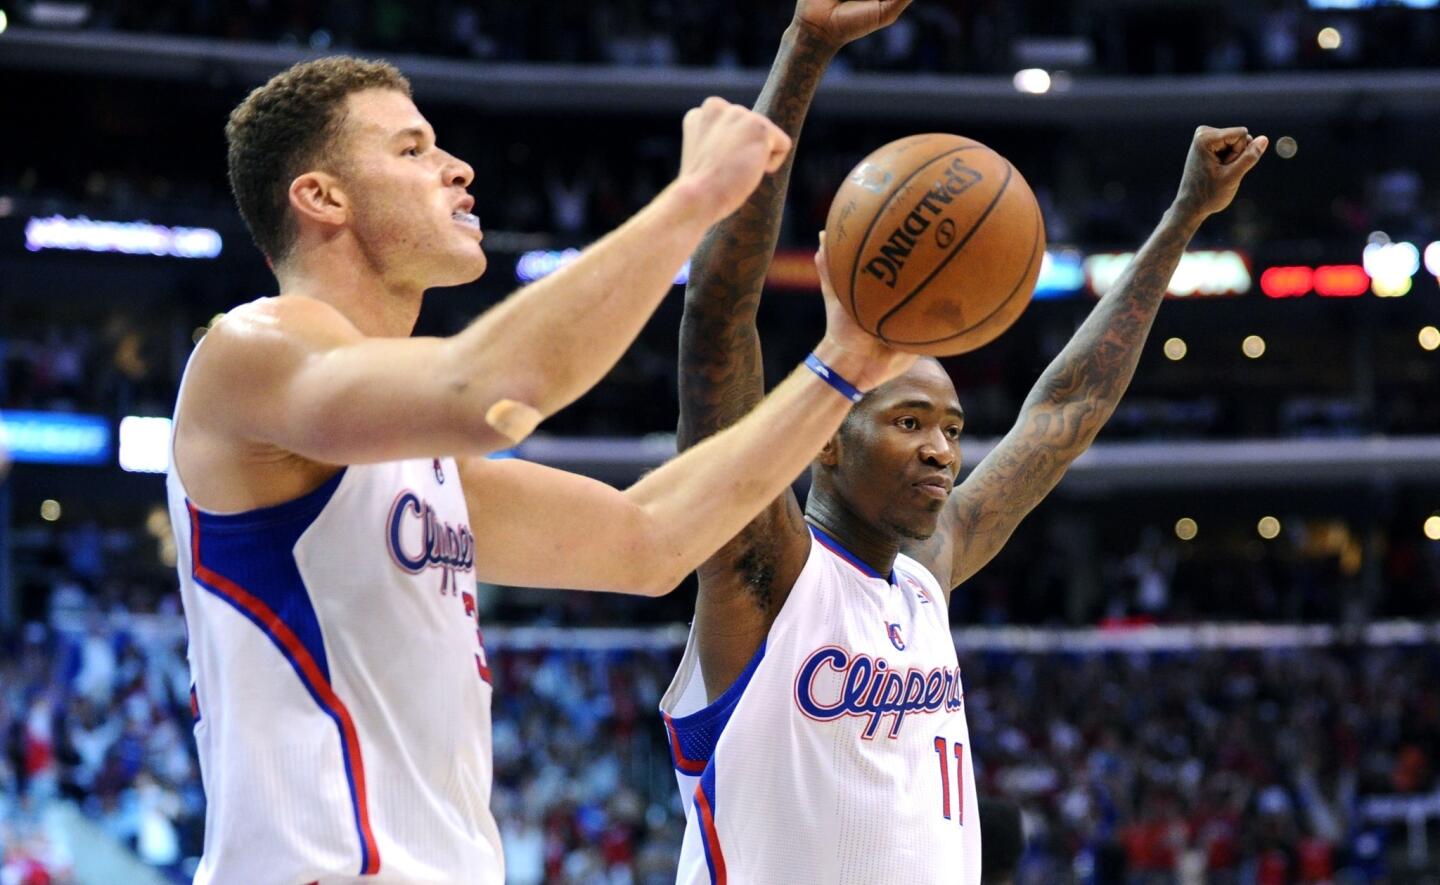 Clippers power forward Blake Griffin and guard Jamal Crawford react after earning a 101-99 victory over the Thunder in Game 4 on Sunday afternoon at Staples Center.